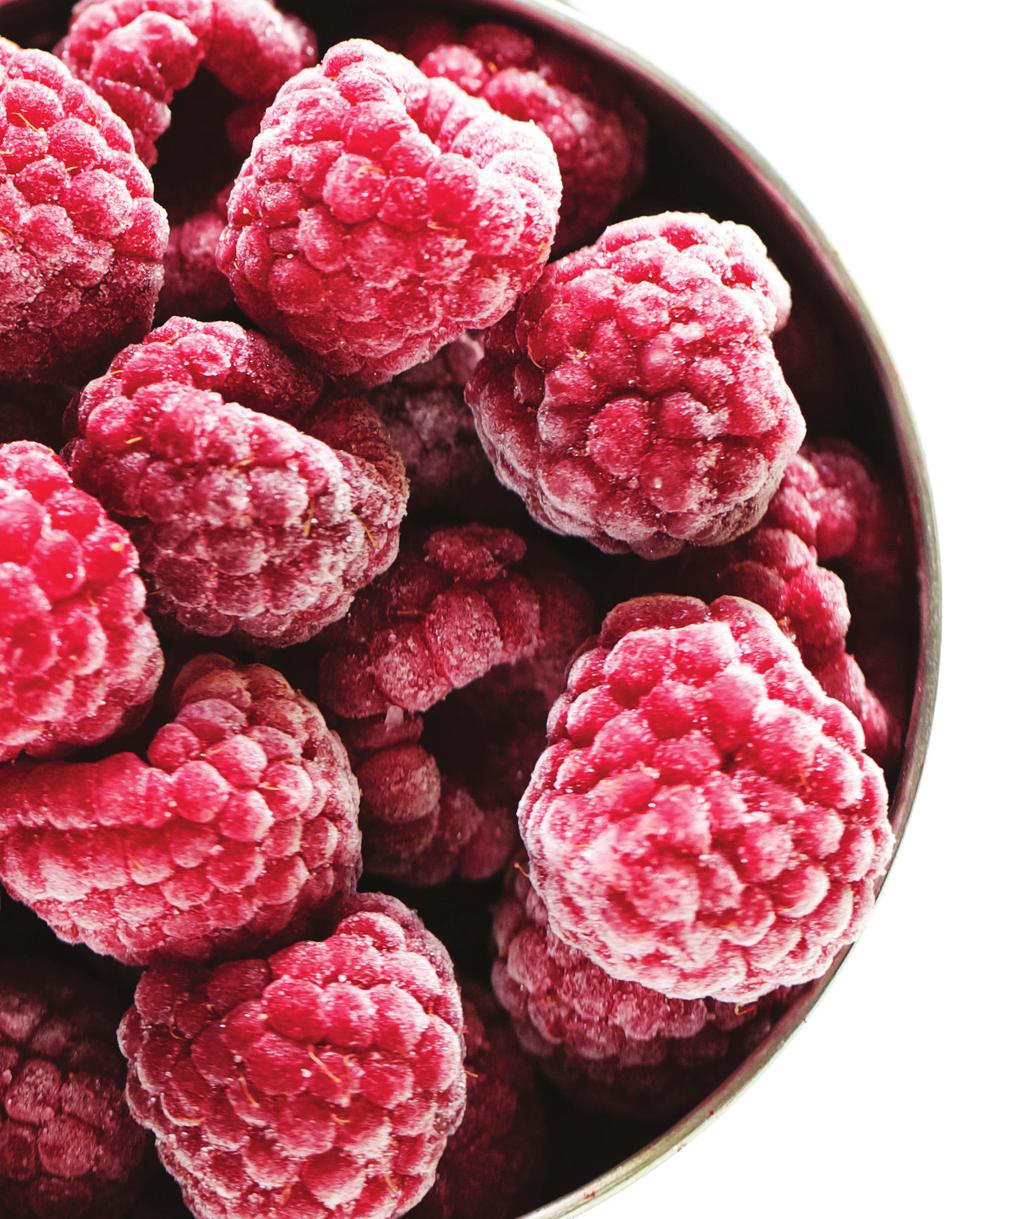 RED RASPBERRY PRODUCT FORMS AND PACK STYLES Product Formats IQF RASPBERRIES (individually quick frozen) Individual raspberries are quick frozen to between -22 and -31 F/30 to -35 C.